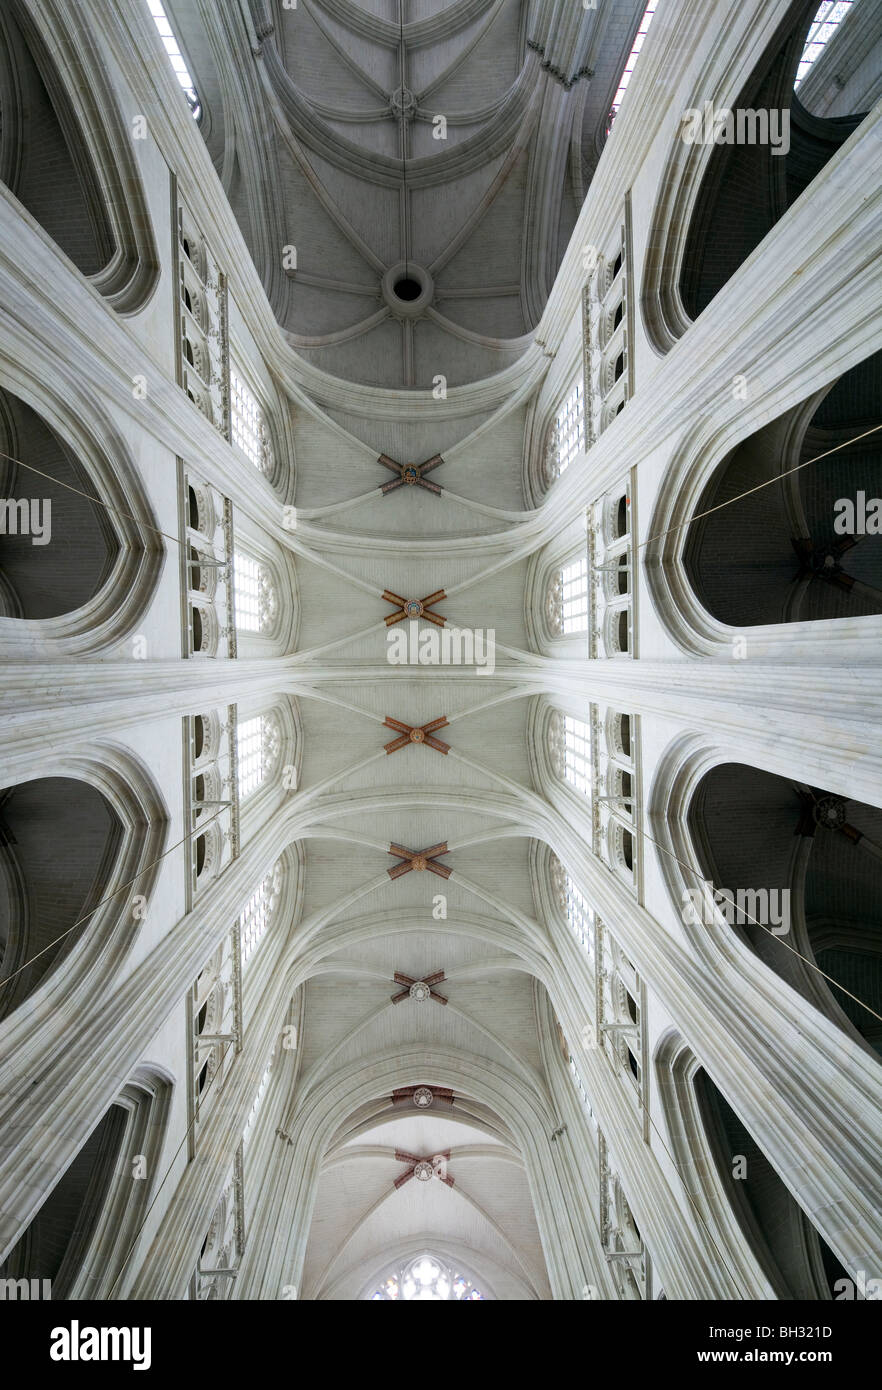 Ceiling of Saint Pierre Cathedral, Nantes, France Stock Photo